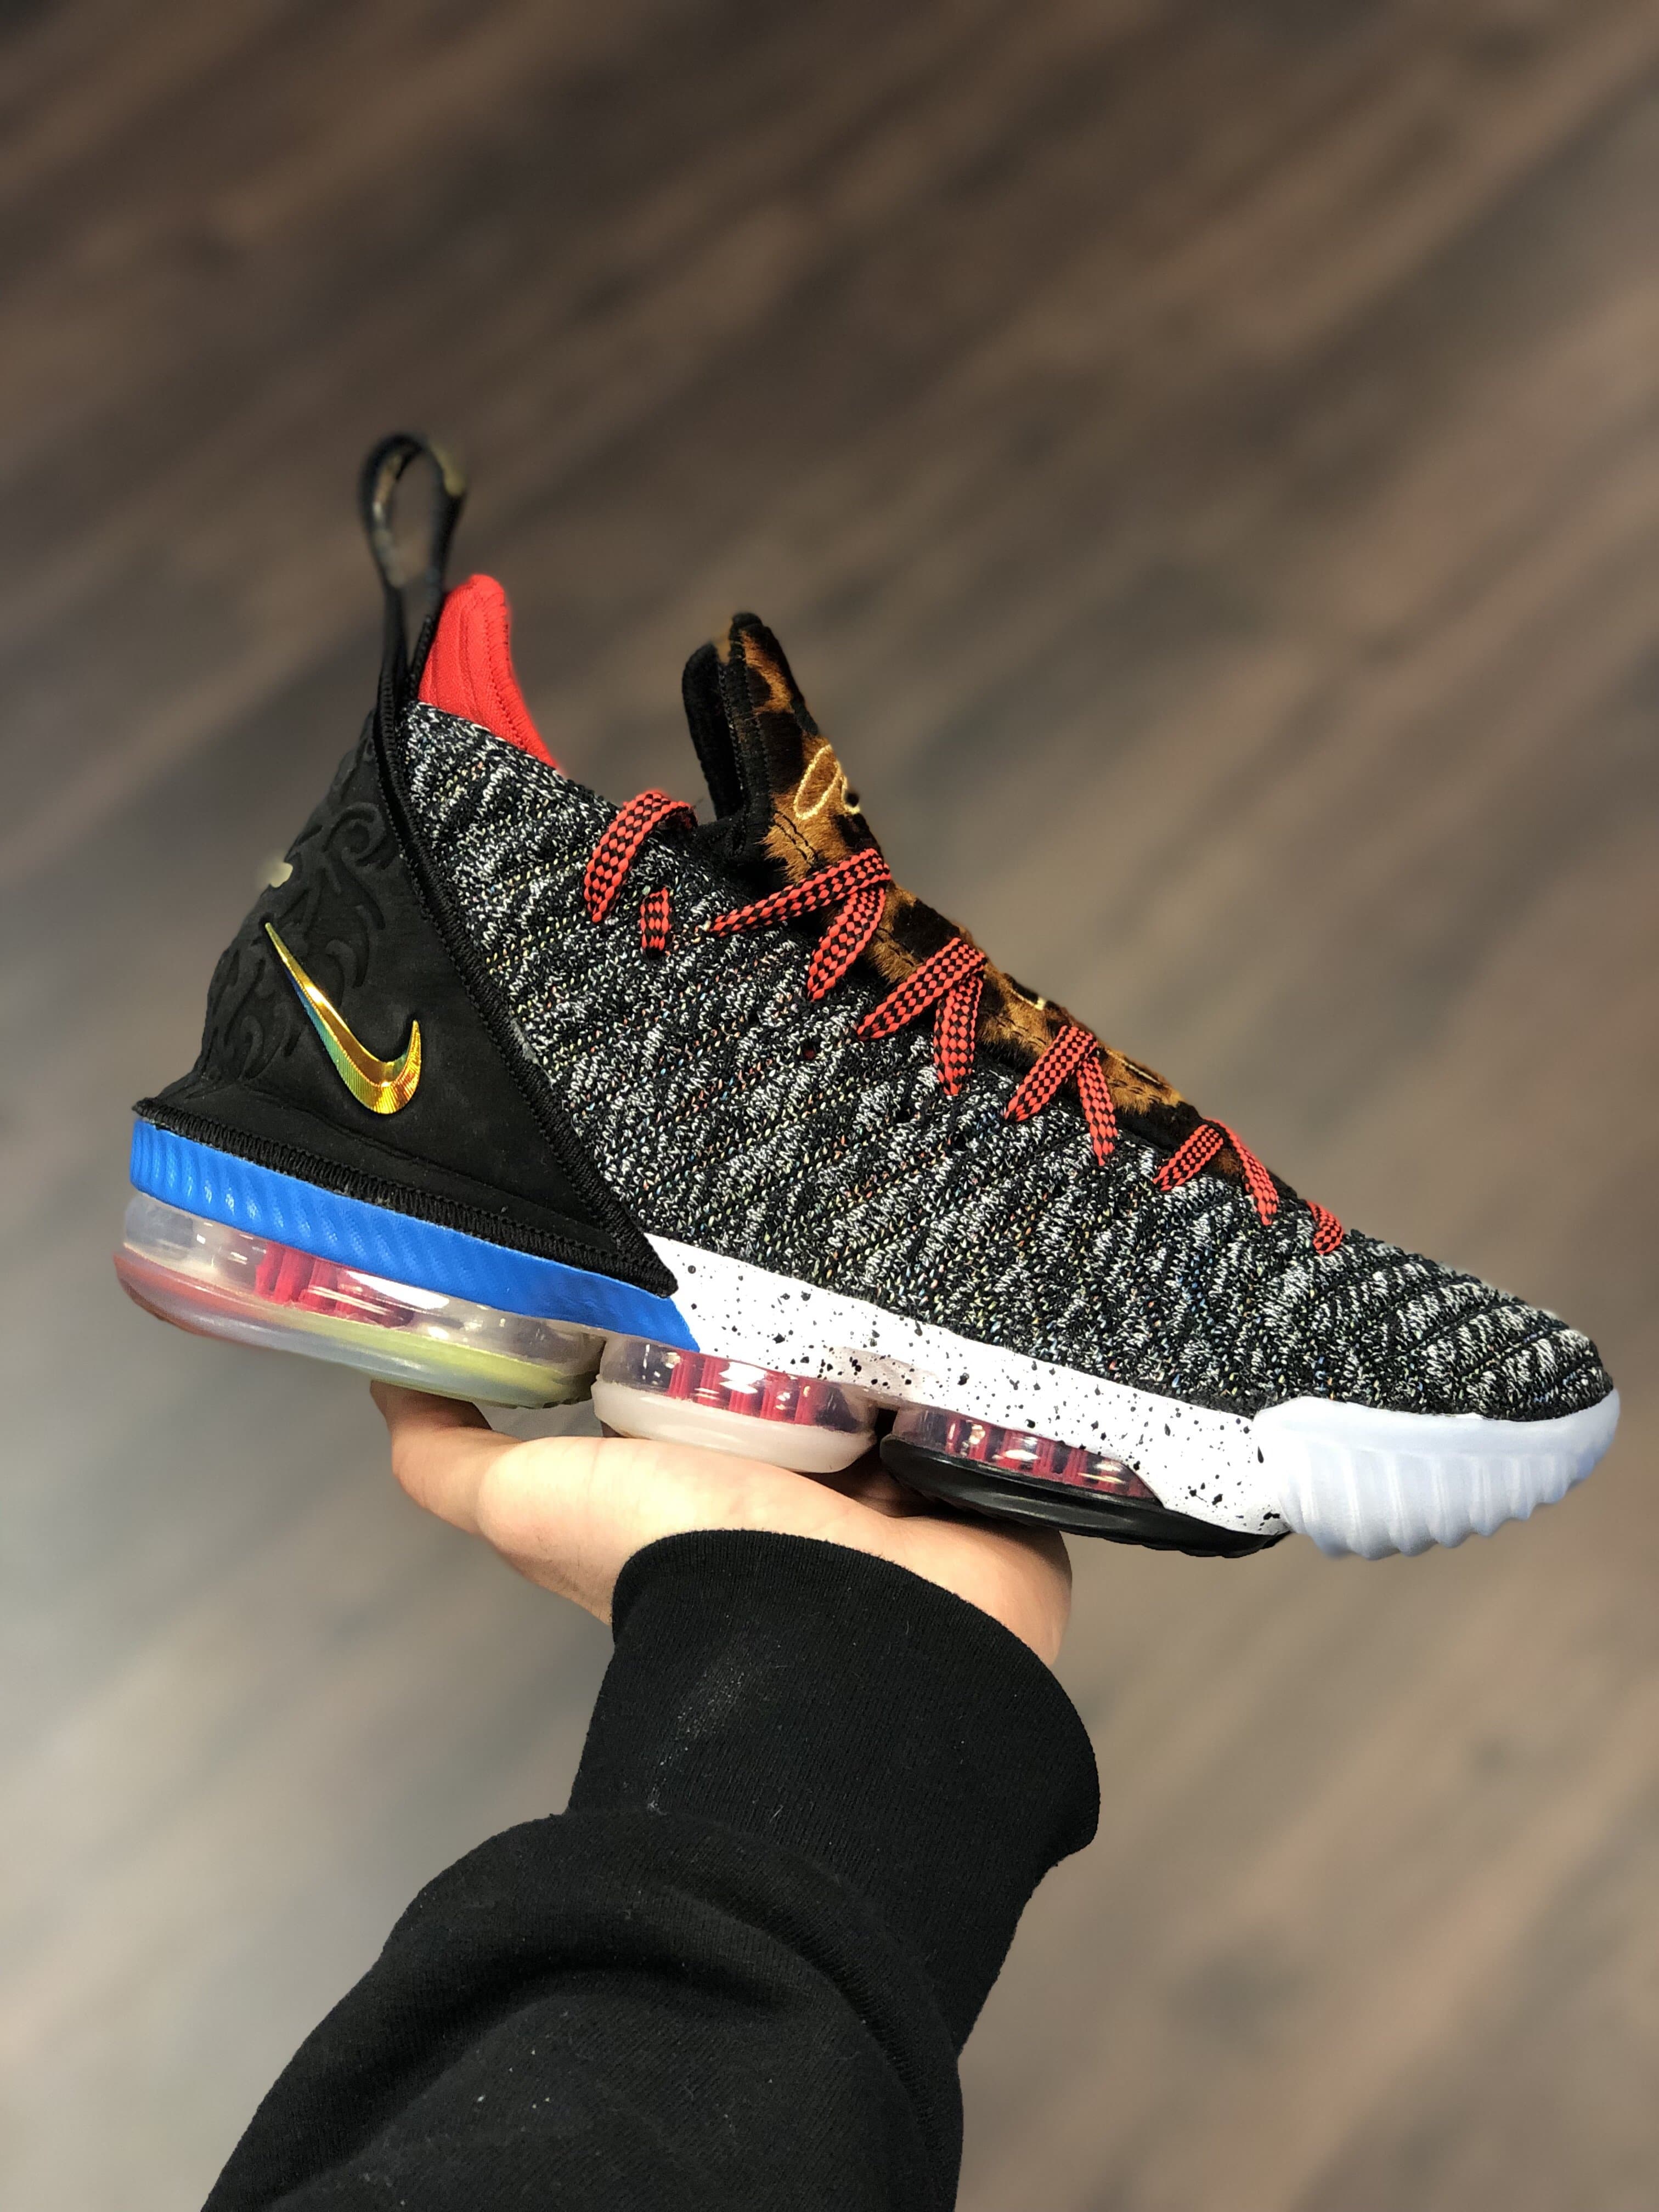 LeBron 16 “What The”